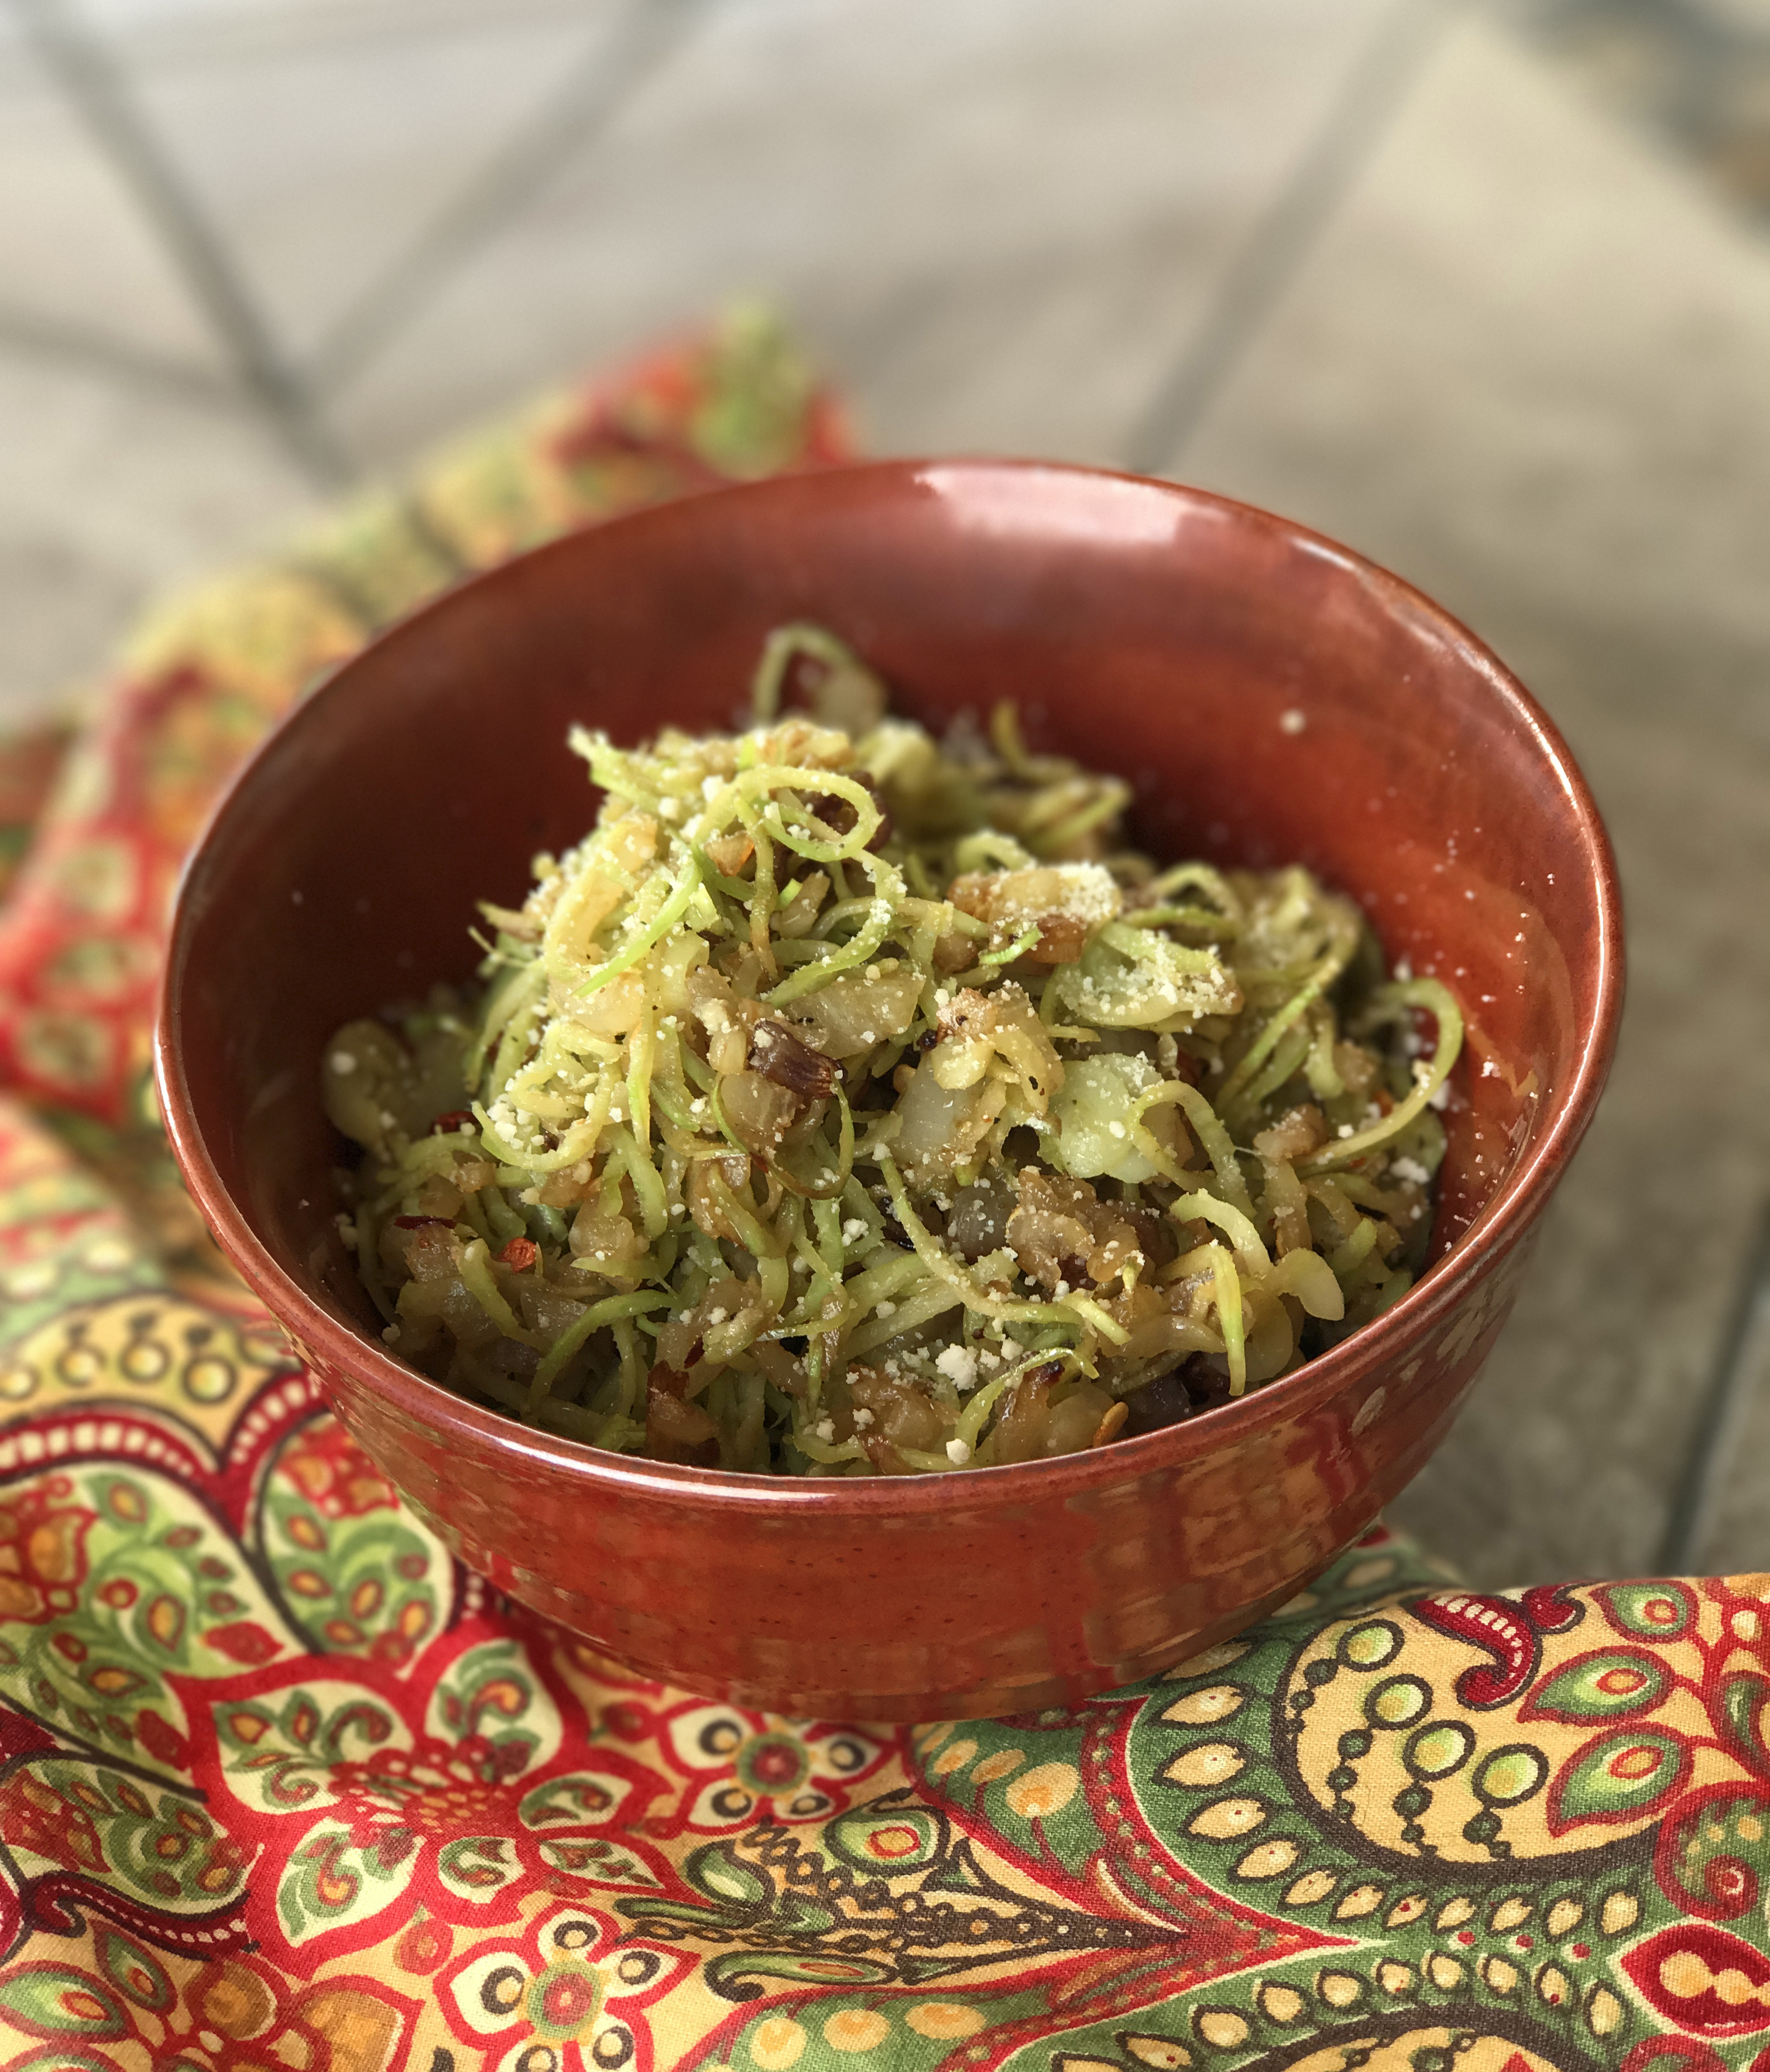 Broccoli Noodles with Sauteed Scallions and Garlic